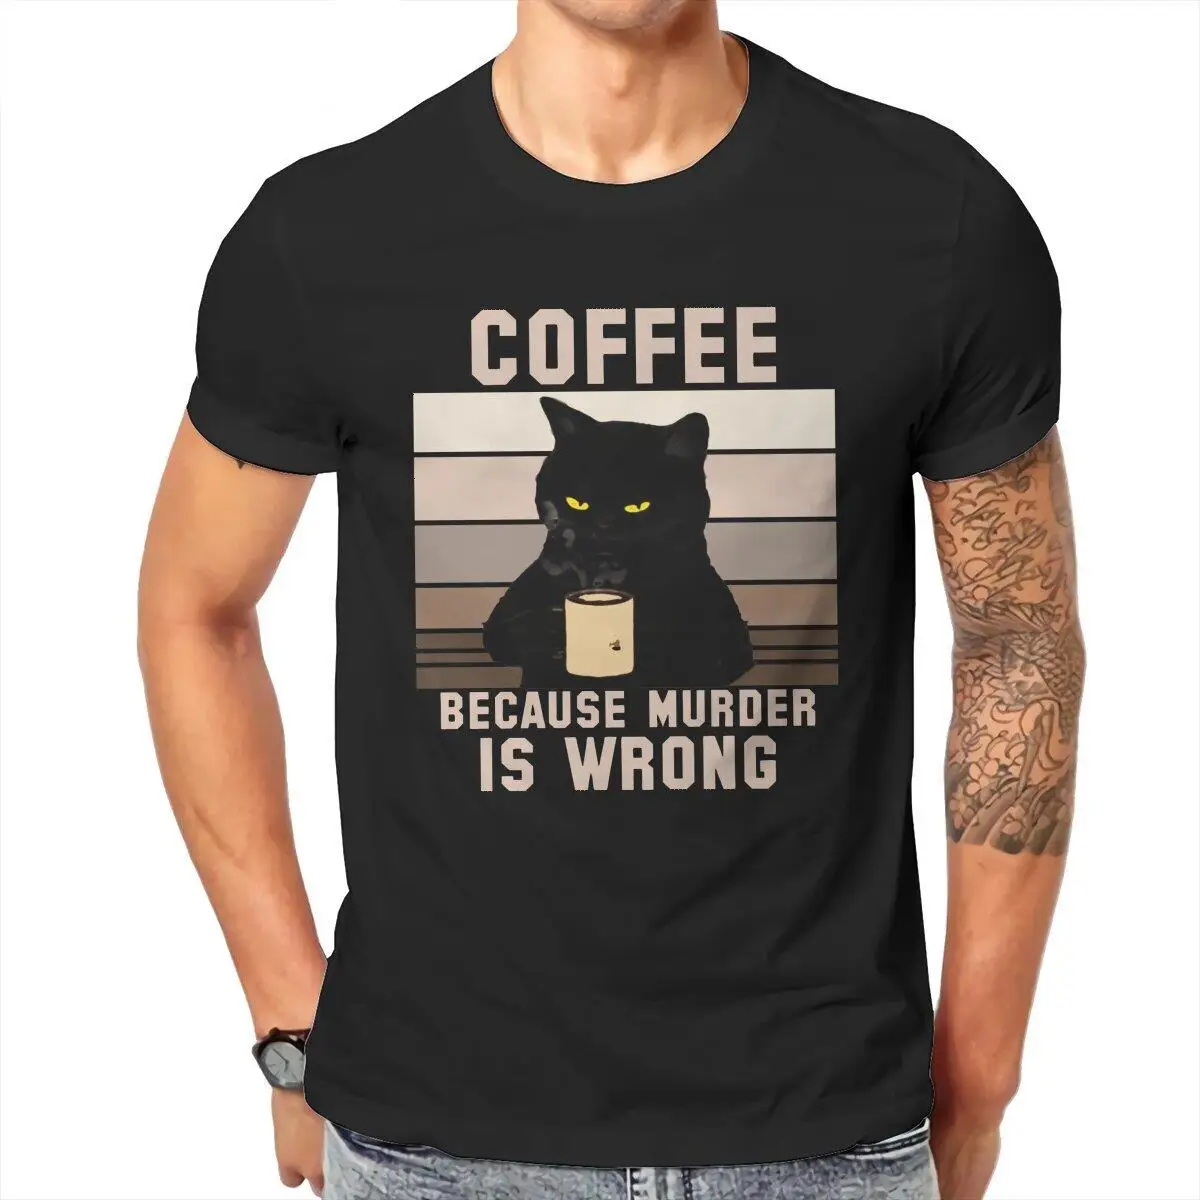 Cat Coffee Because Murder Is Wrong  Men's T Shirt  Vintage Tee Shirt Short Sleeve O Neck T-Shirt Cotton Gift Idea Clothes